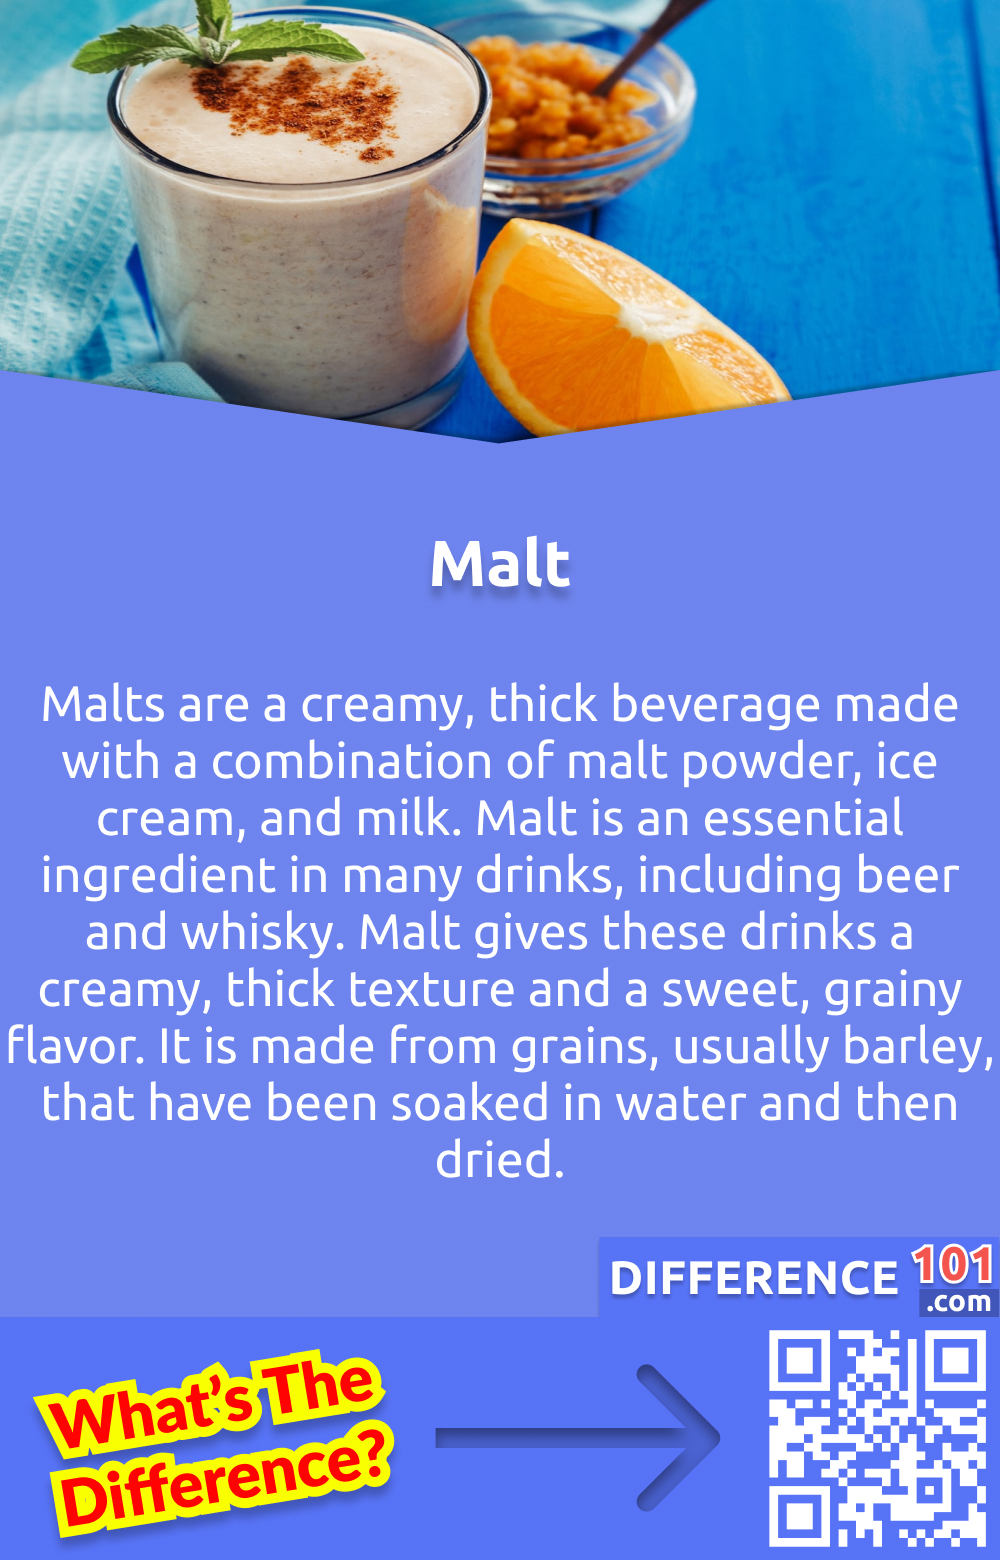 What Is Malt? Malts are a creamy, thick beverage made with a combination of malt powder, ice cream, and milk. Malt is an essential ingredient in many drinks, including beer and whisky. Malt gives these drinks a creamy, thick texture and a sweet, grainy flavor. It is made from grains, usually barley, that have been soaked in water and then dried. This process, known as malting, unlocks the starches in the grain that are needed to make beer or whiskey. In addition to activating the starches, the malt also creates a range of flavors, colors, and aromas in the beer or whiskey. Depending on the malt and the process used, the flavor of the beer or whiskey can range from light and floral to malty and sweet.